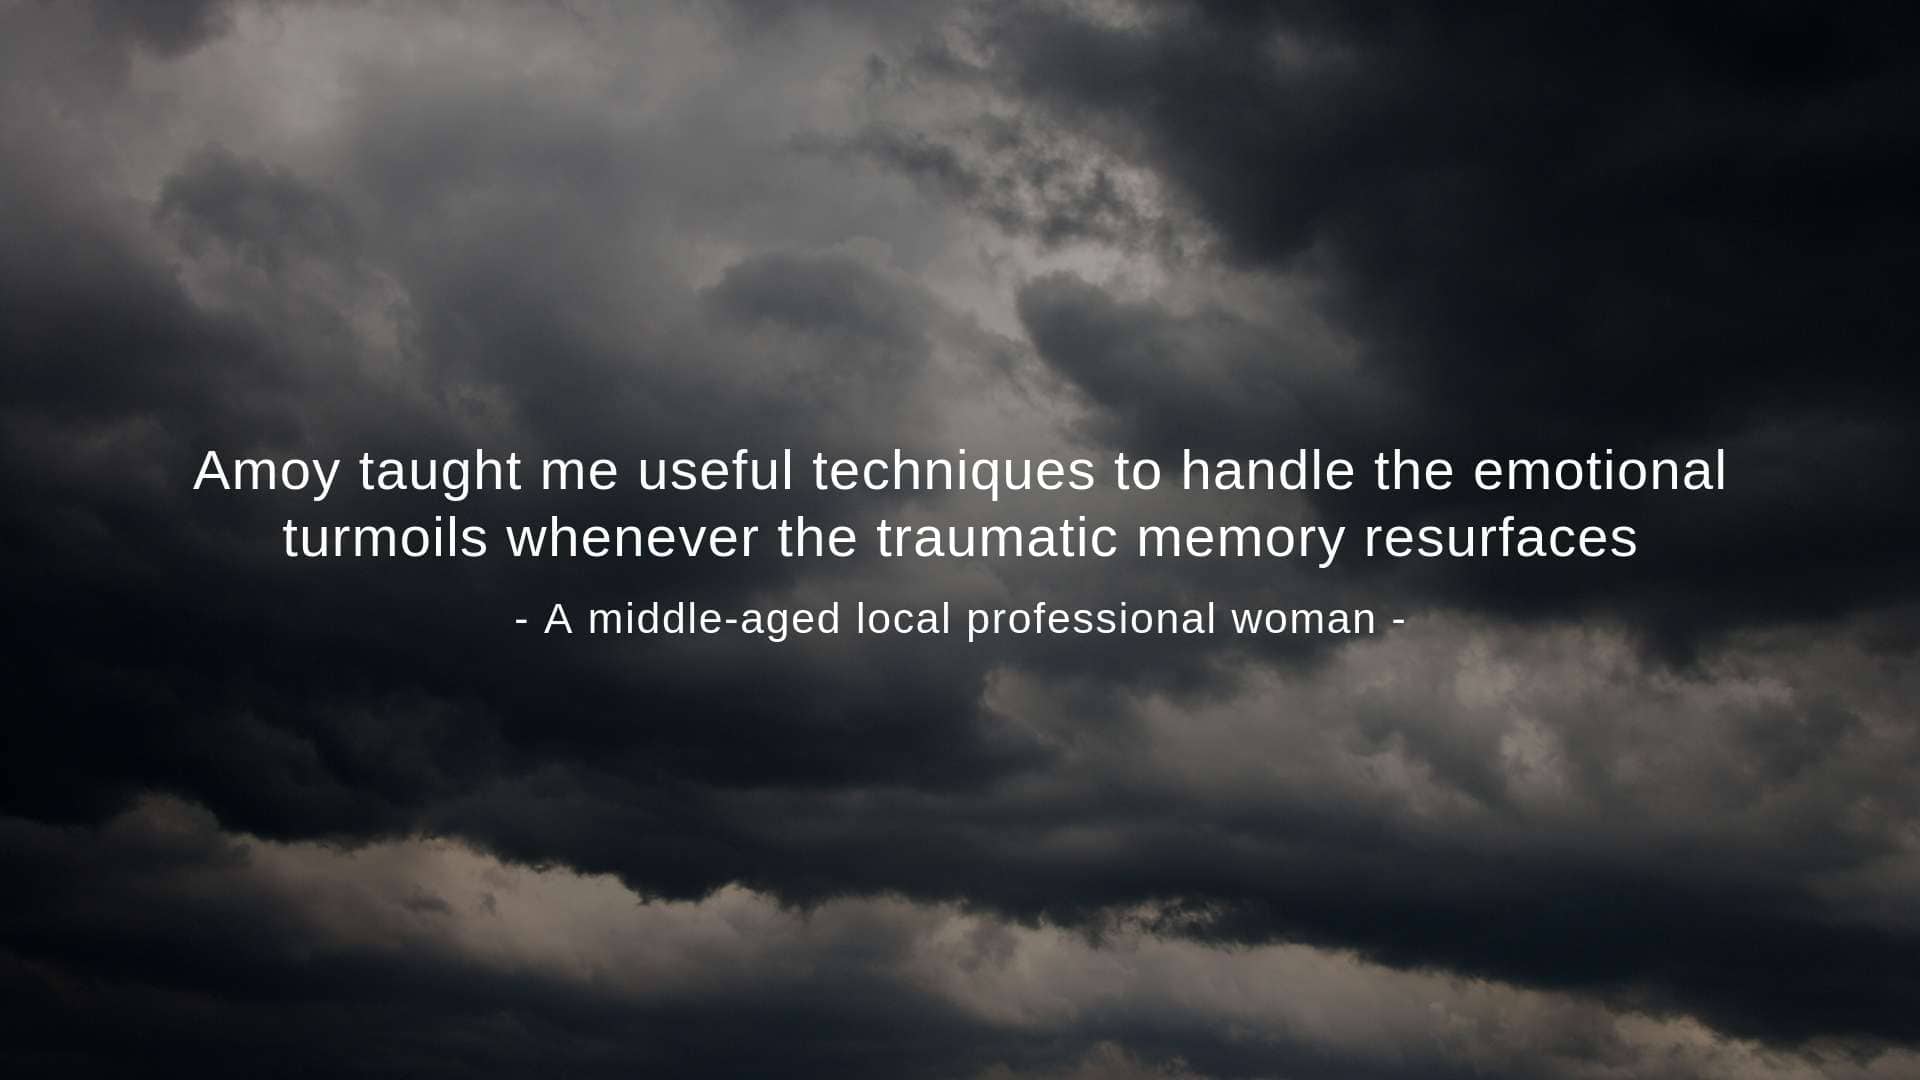 "She taught me useful techniques to handle the emotional turmoils whenever the traumatic memory resurfaces," a middle-aged local professional woman said